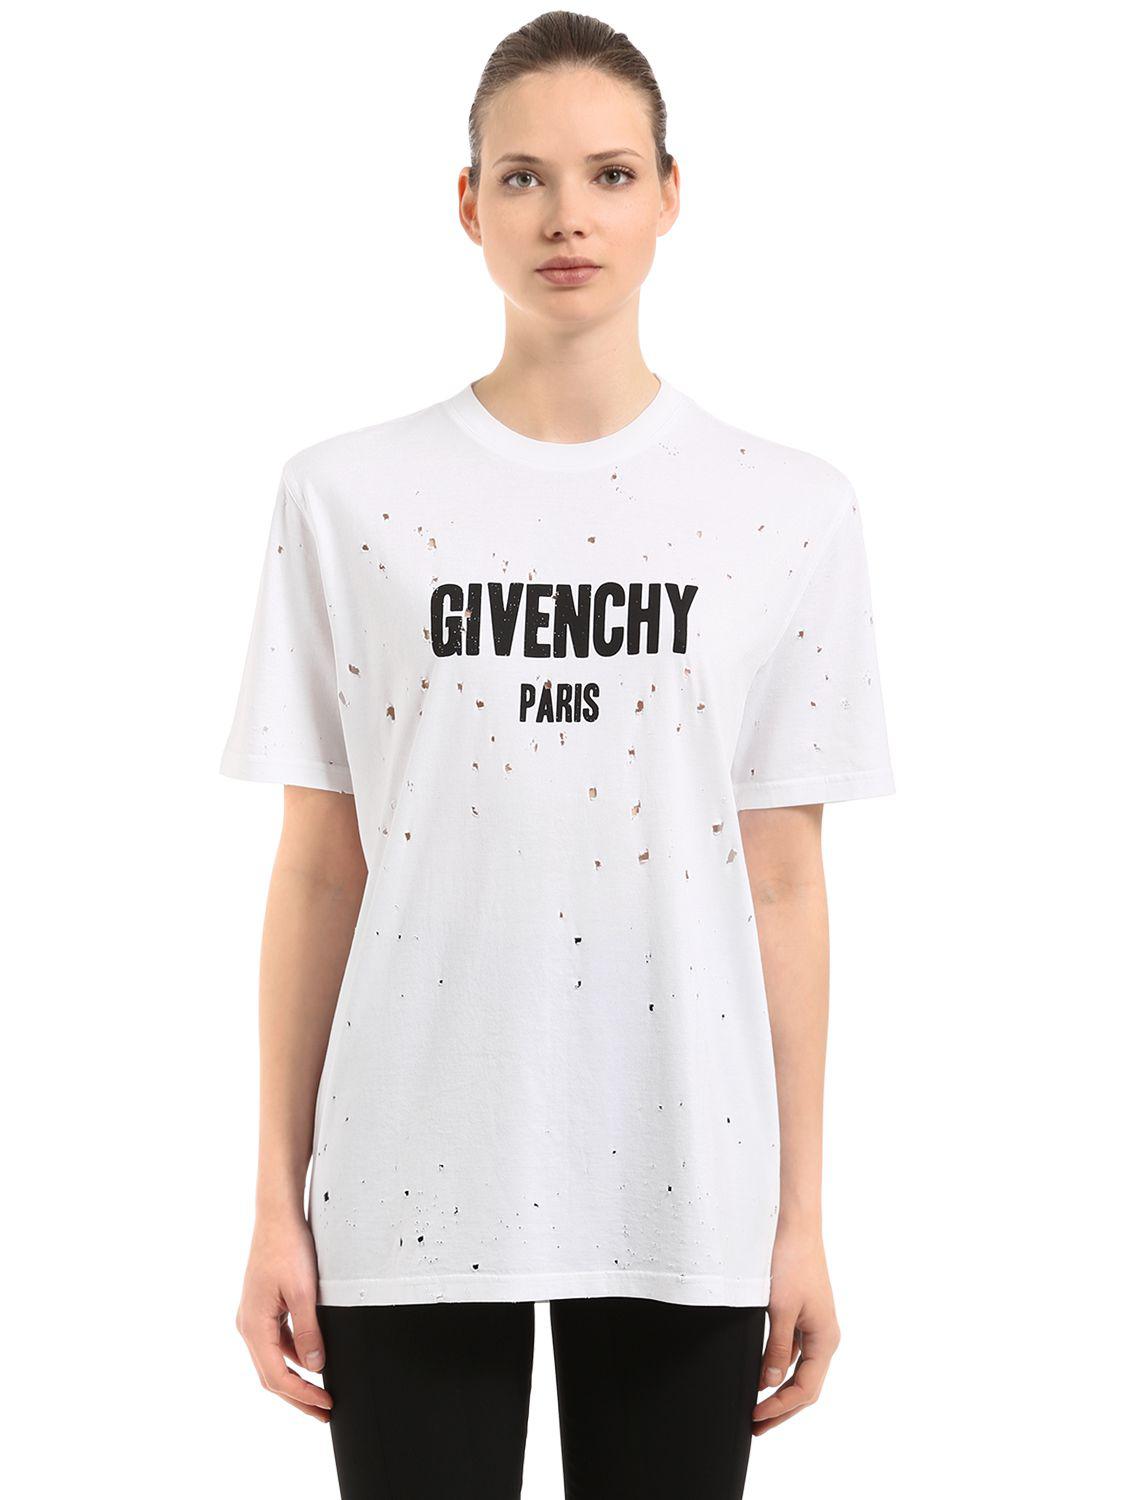 Givenchy Tee Shirt Homme Blanc